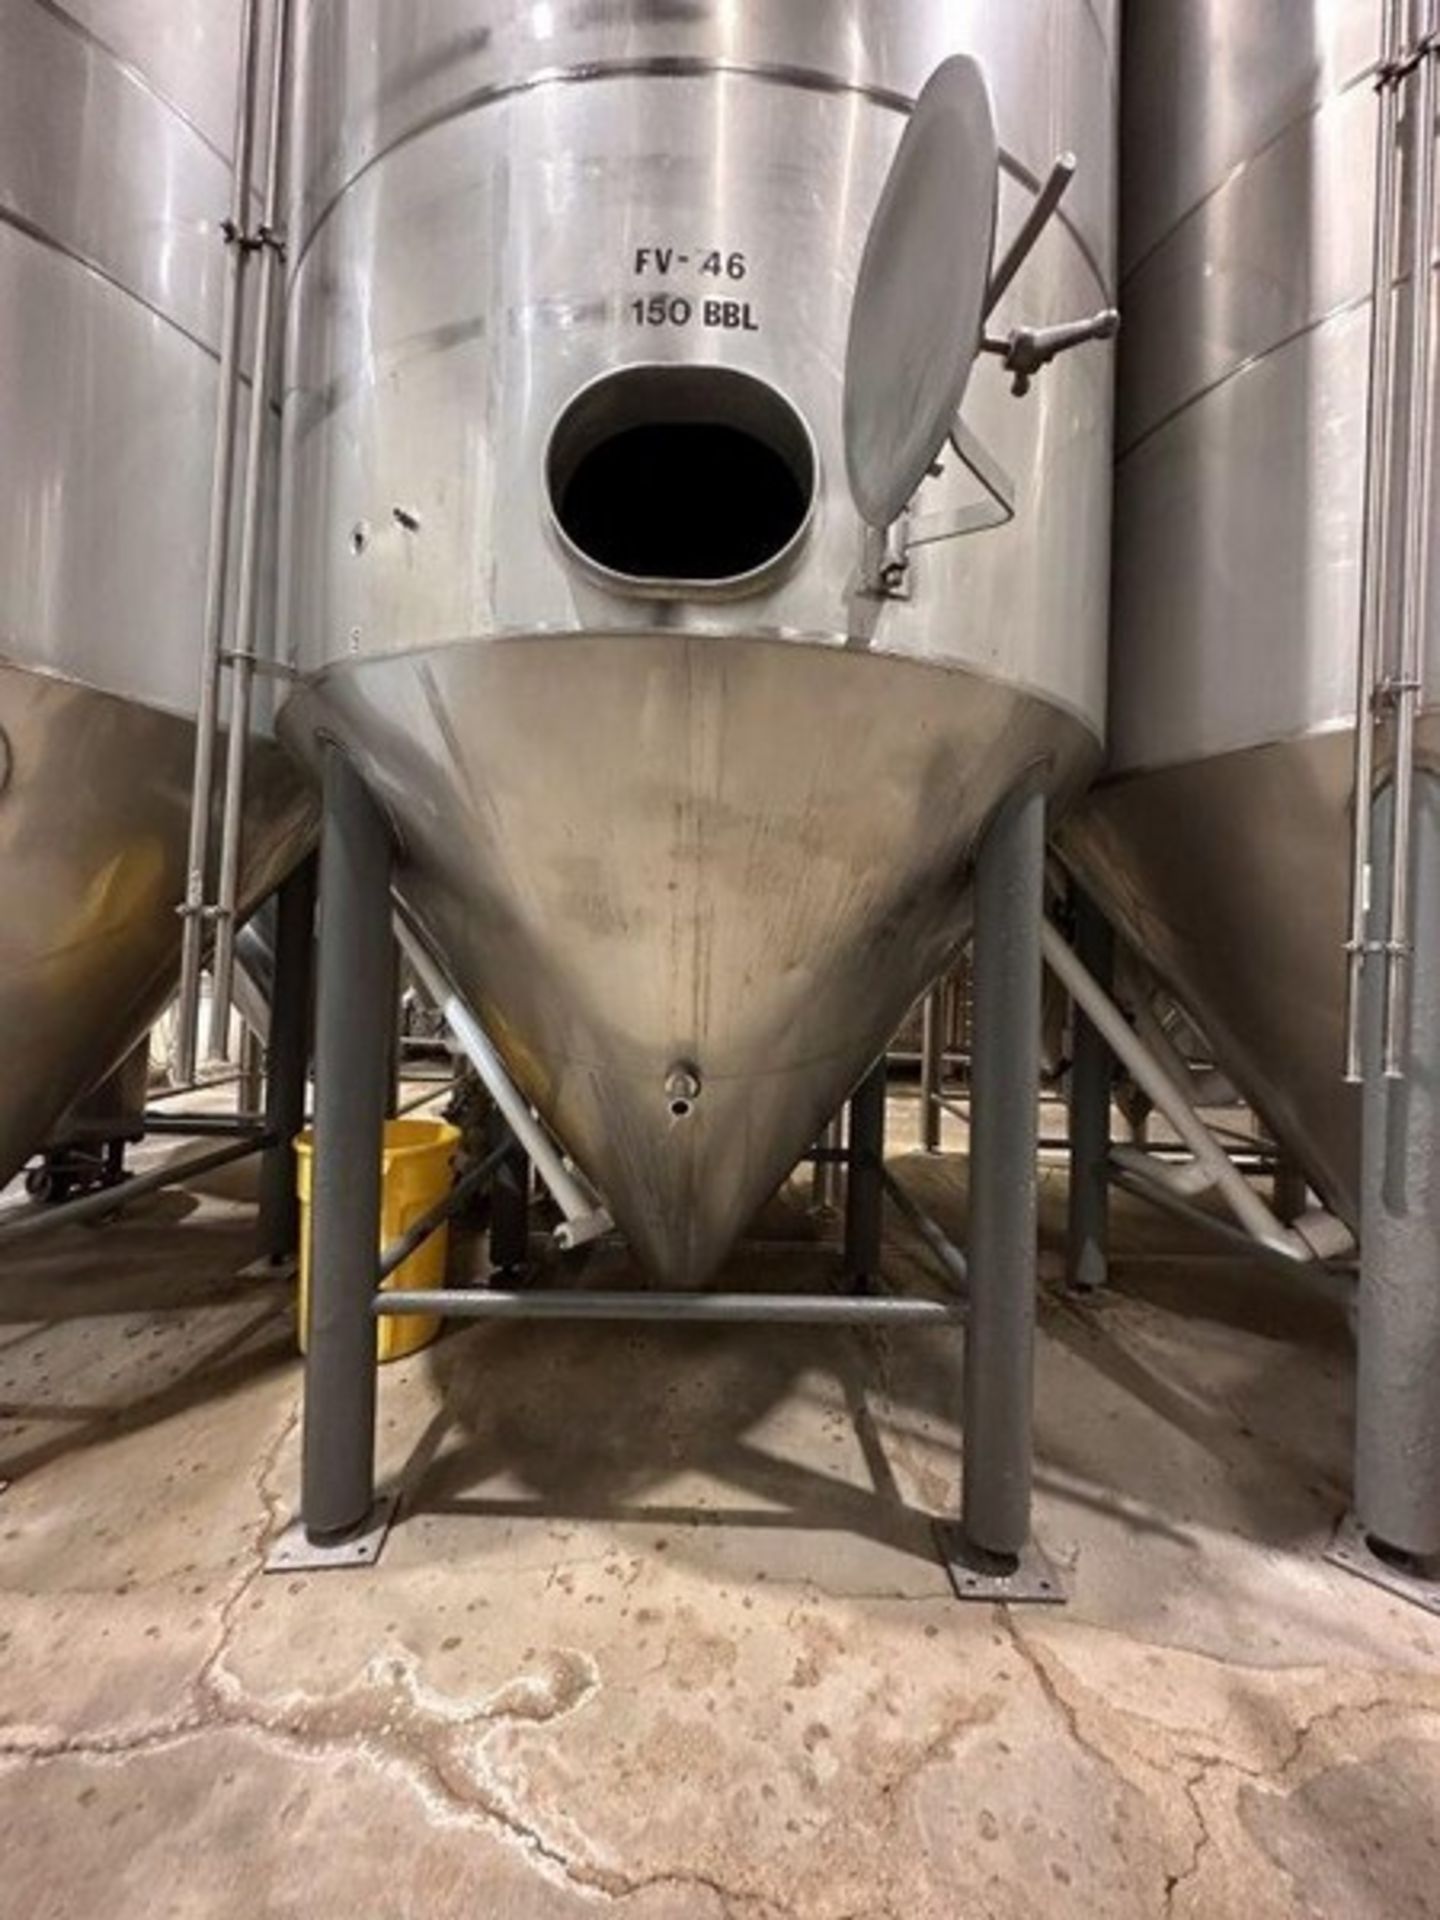 150 BBL (4650 Gallon) Vertical Cone Bottom 304 Stainless Steel Jacketed Vessel. Manufactured by San - Bild 4 aus 9